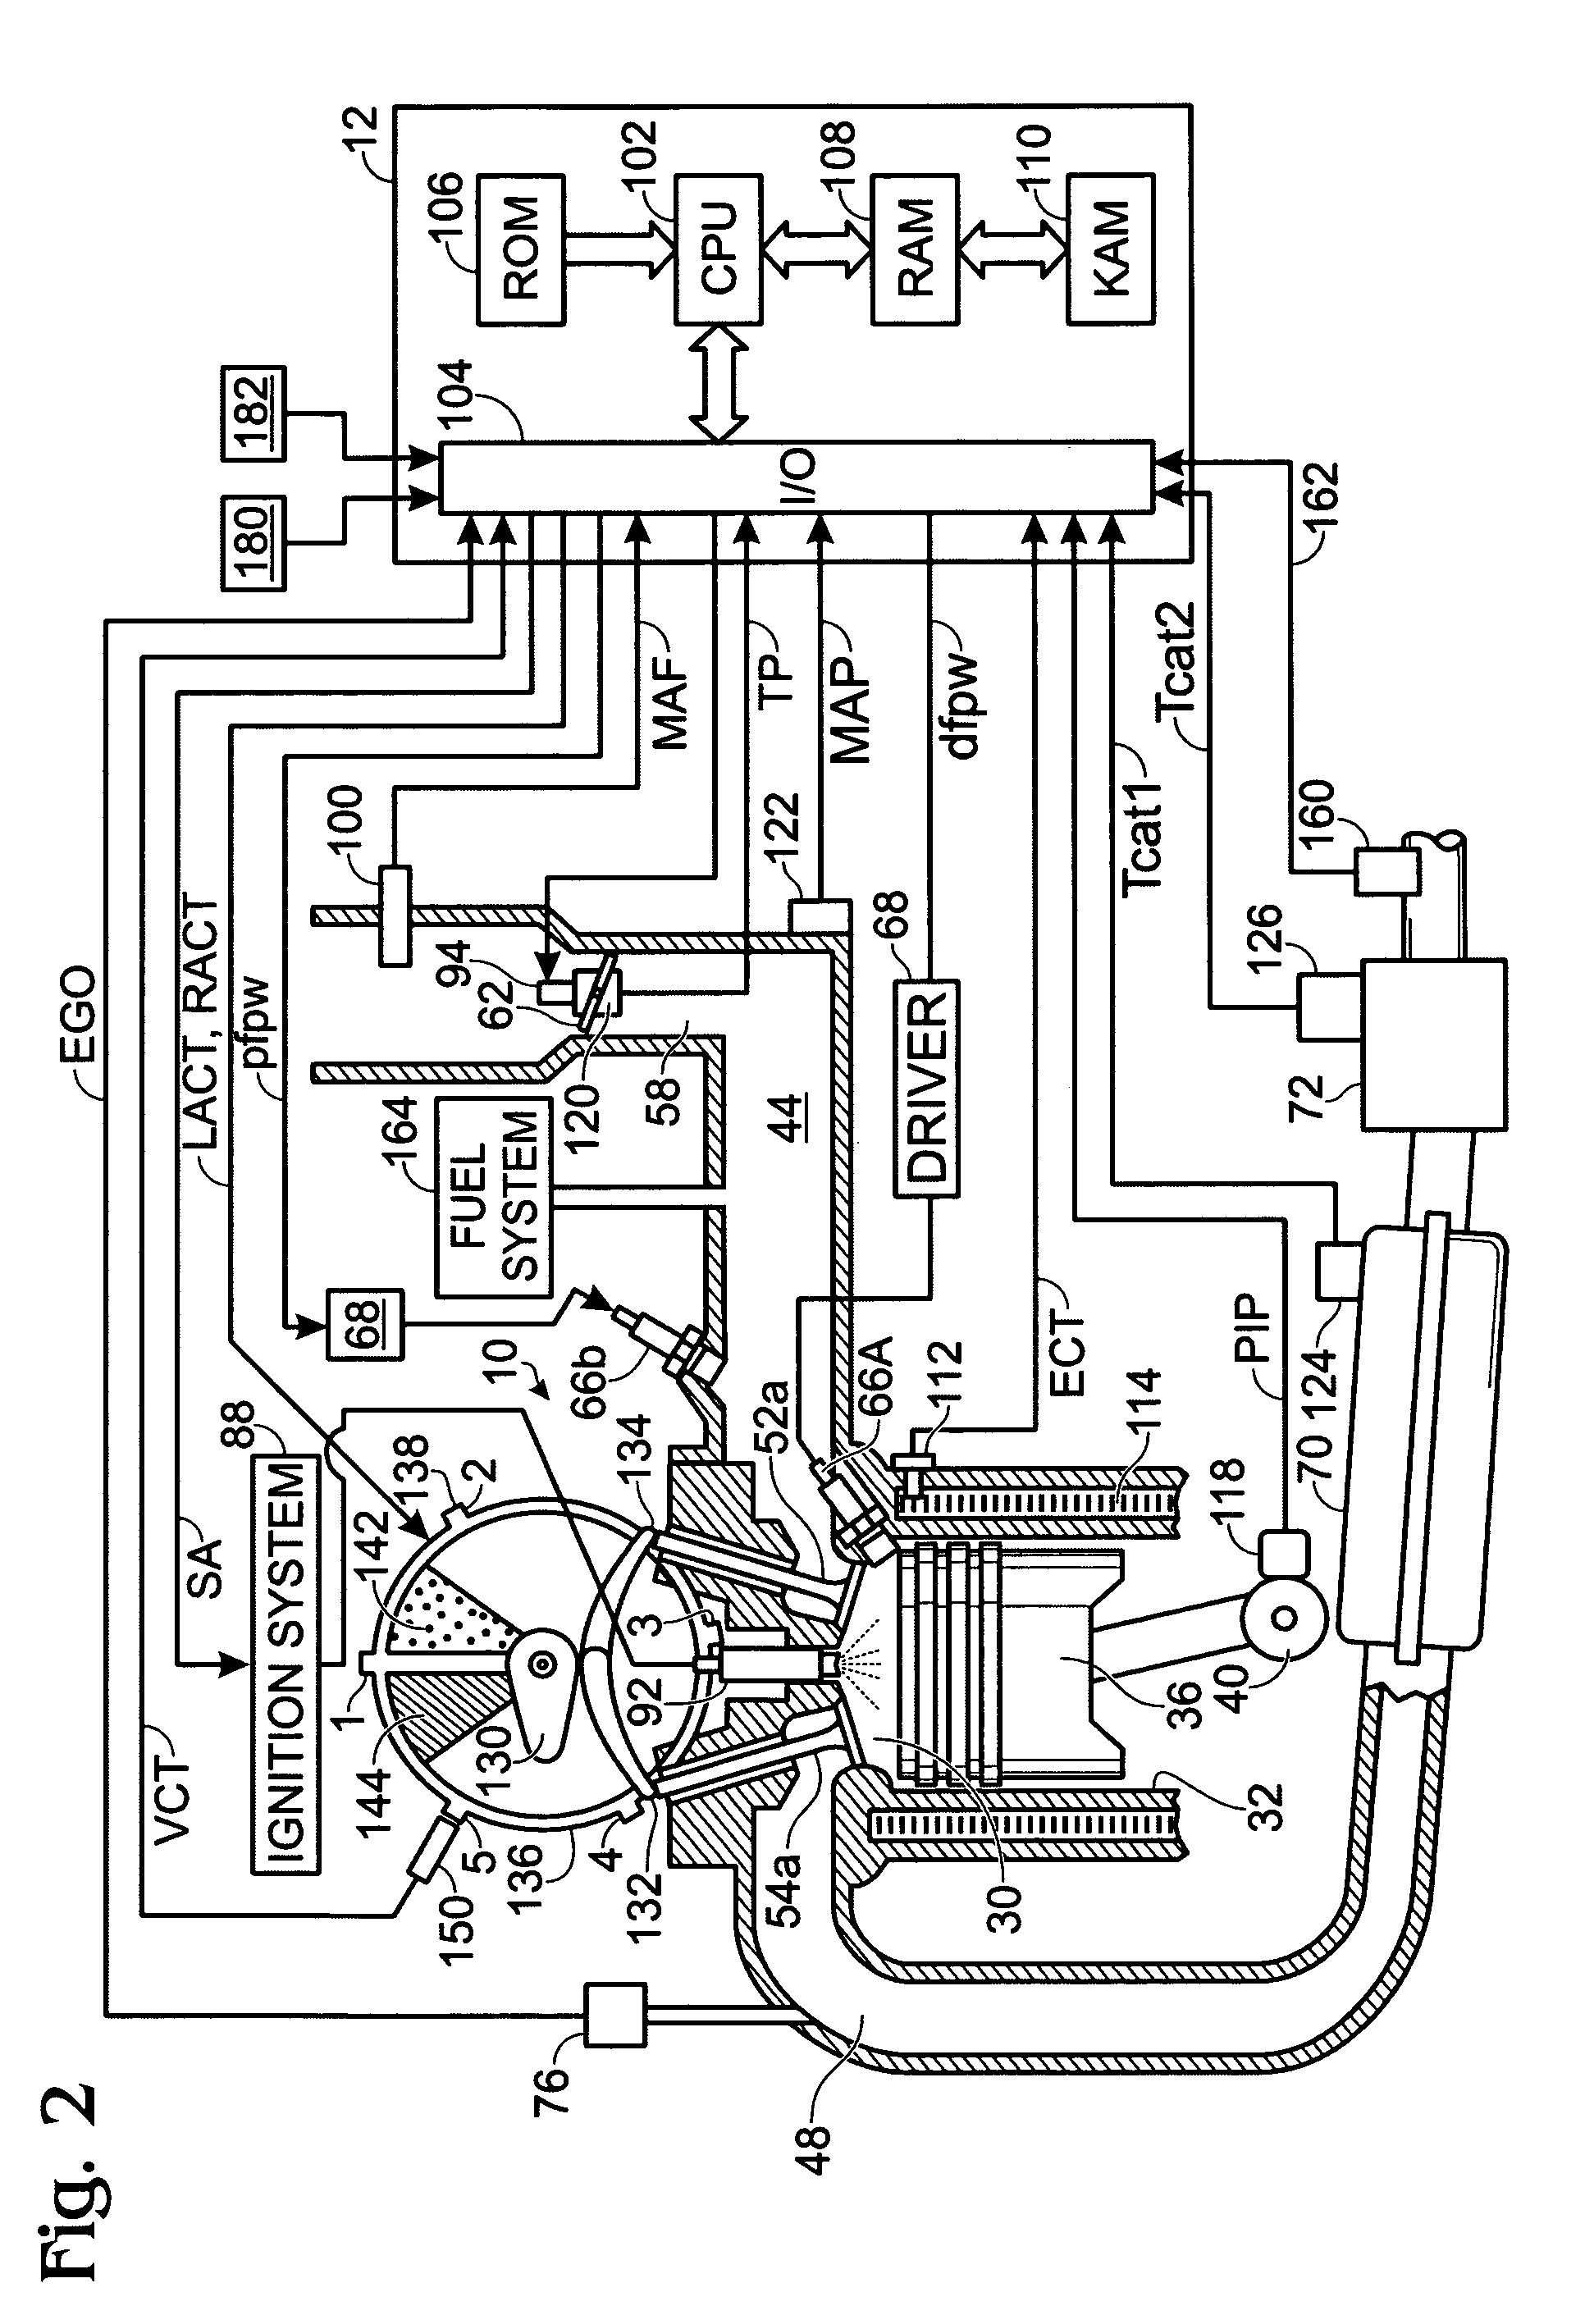 Engine with water and/or ethanol direct injection plus gas port fuel injectors